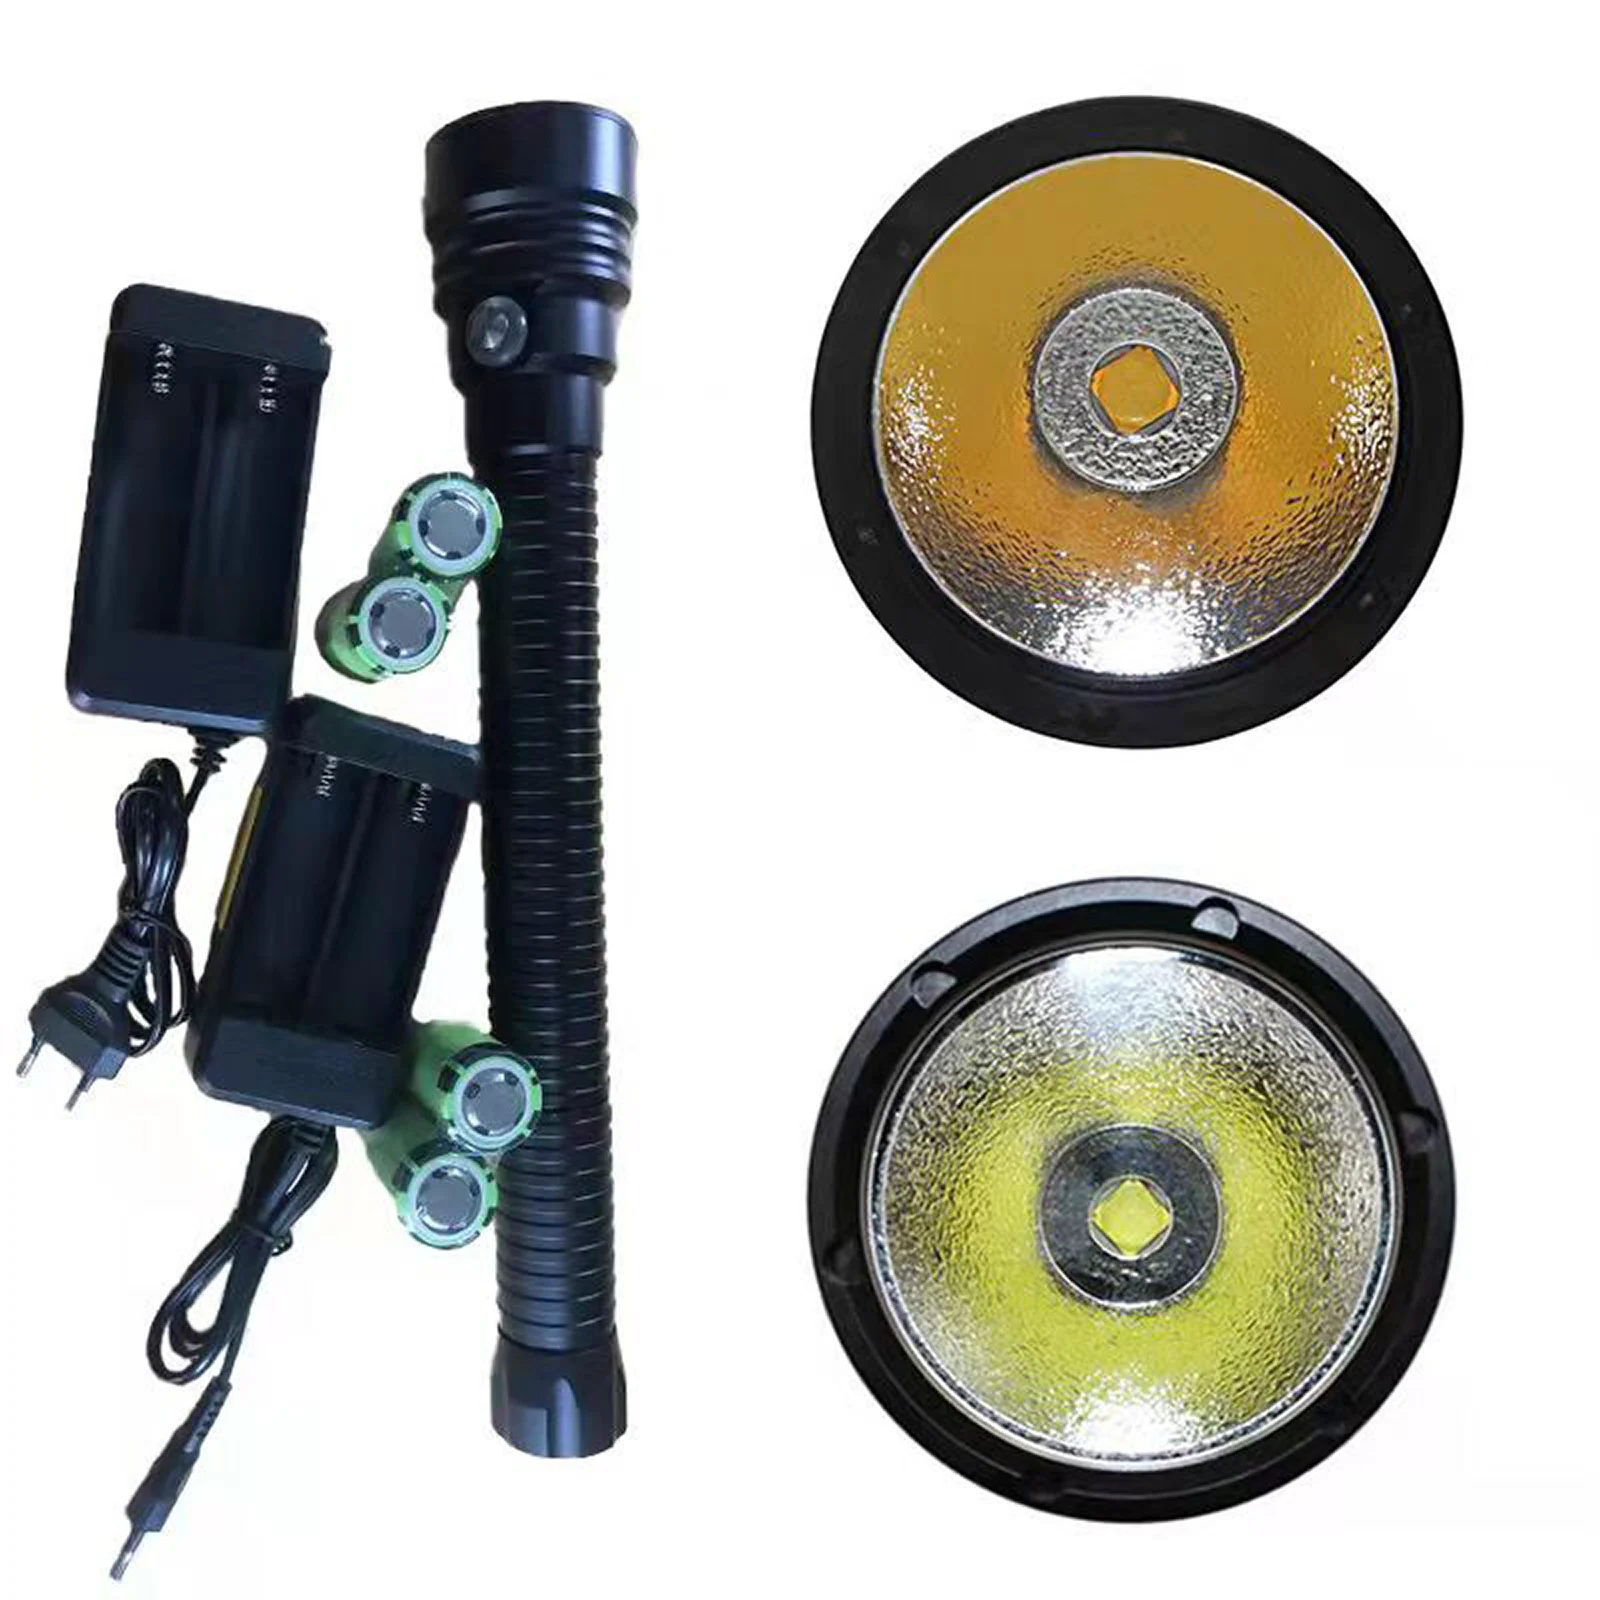 Powerful XHP70.2 led Yellow/White Light 4000 Lumens Diving Flashlight Torch 2/3/4/*26650 battery dive light led underwater xhp70 updated led diving flashlight xhp70 4000 lumens yellow light underwater 100m waterproof scuba torch 26650 battery charger